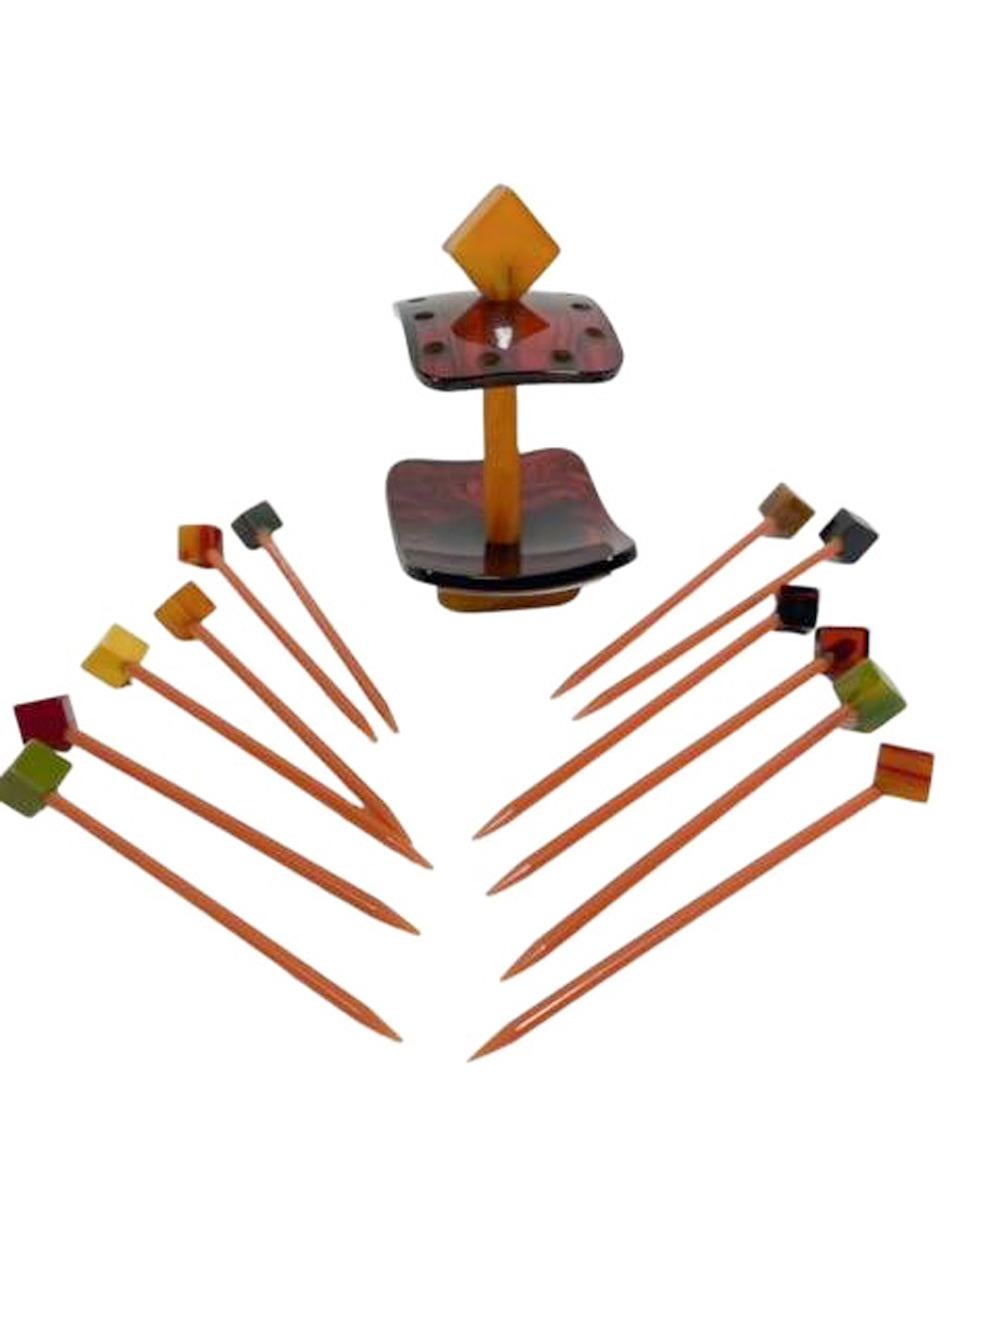 20th Century Art Deco Set of 12 Cocktail Picks & Stand in Butterscotch and Tortoise Bakelite For Sale